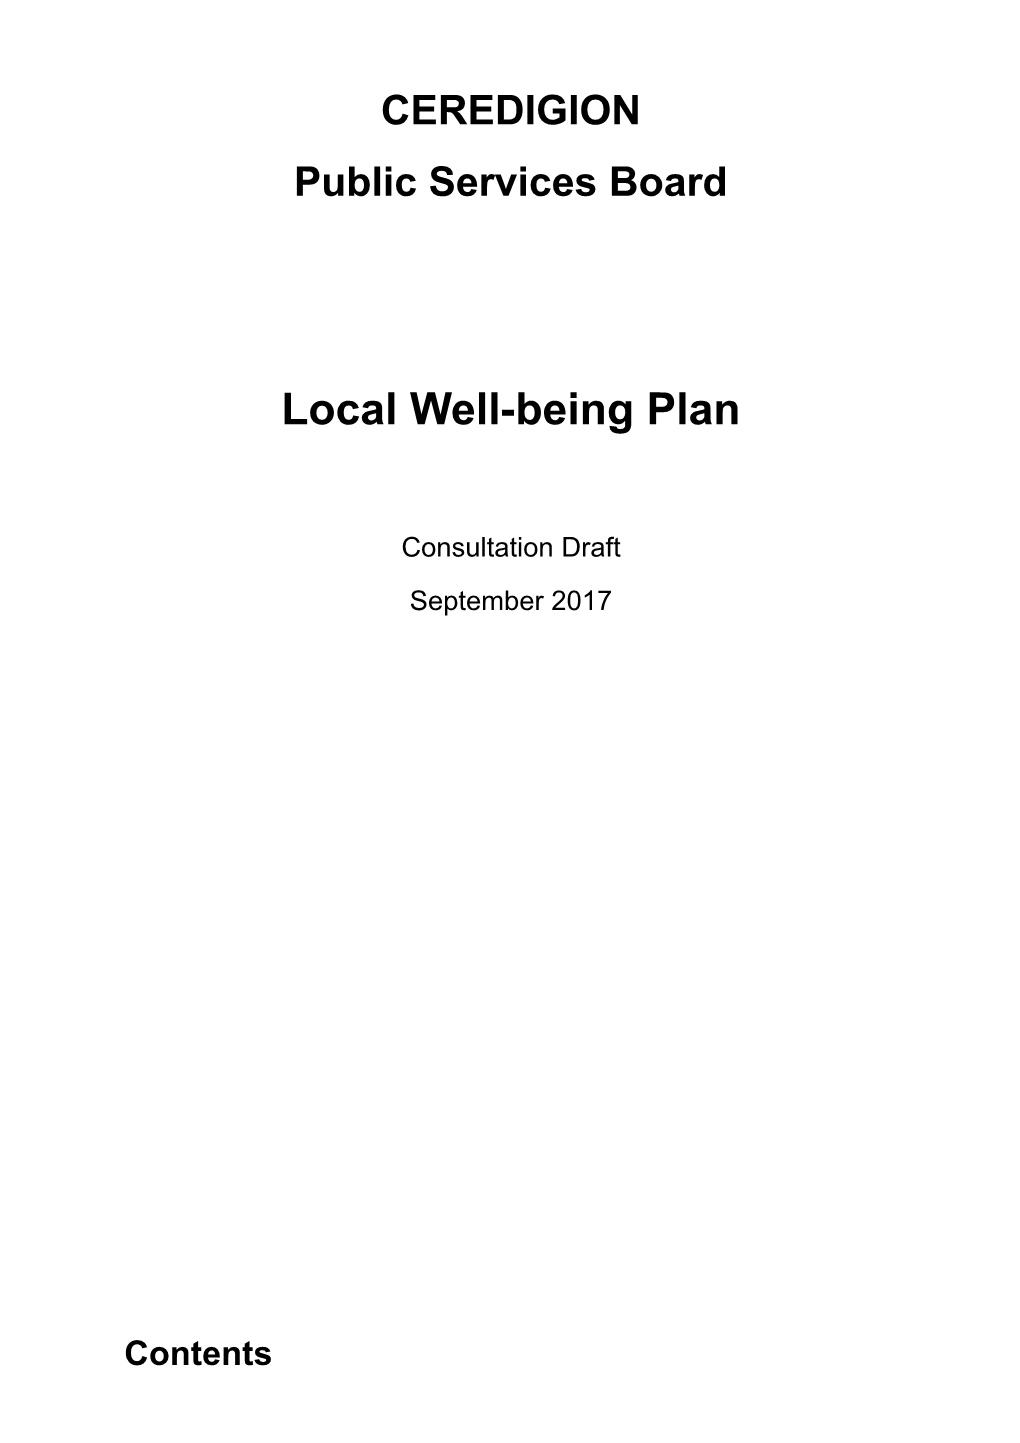 Local Well-Being Plan